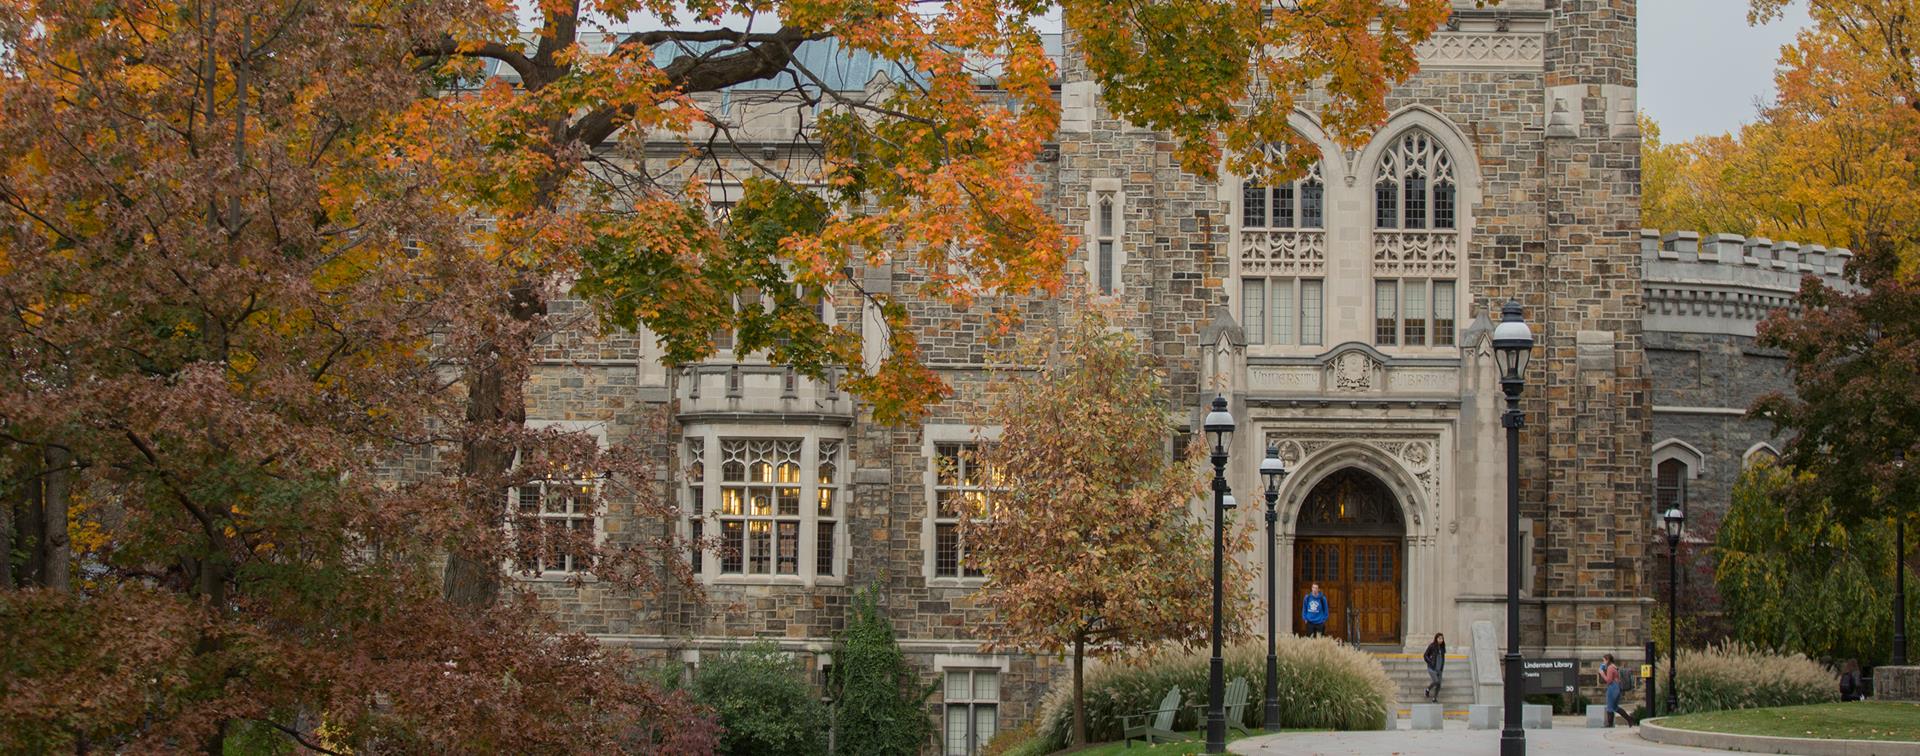 A beautiful fall scene with an old stone campus building in the background.